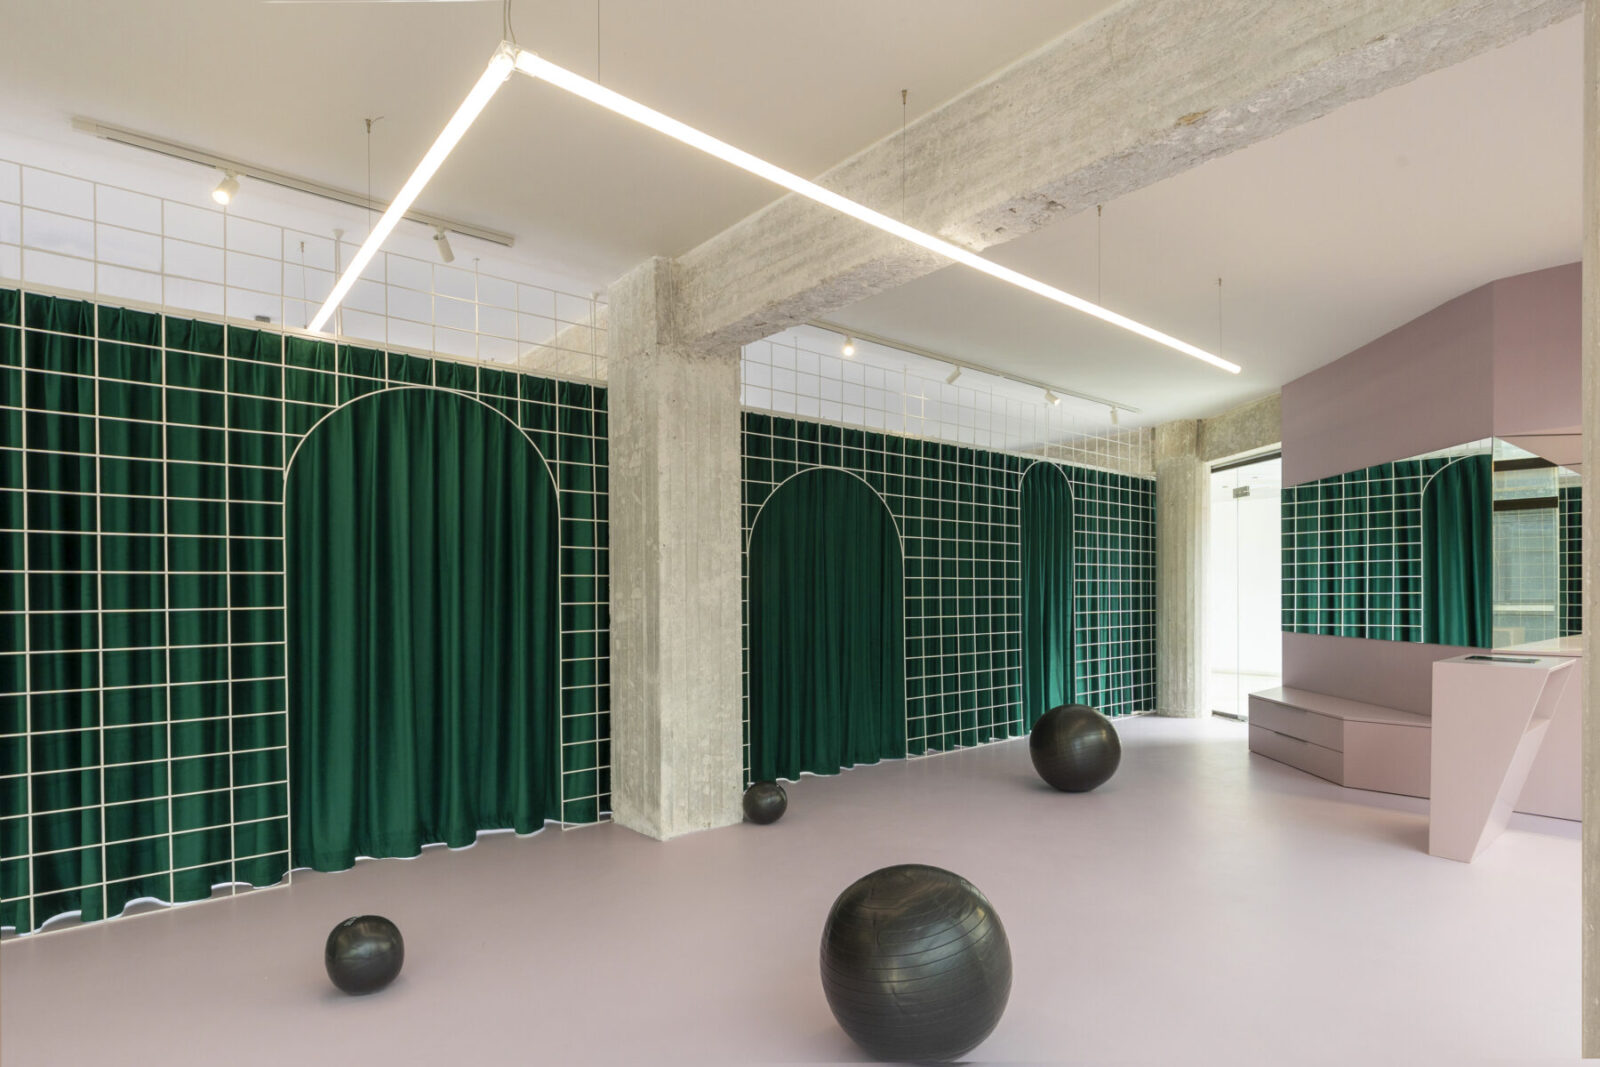 Archisearch A former office space transformed into a Pilates Studio by Theo Poulakos and Manos Botsaris